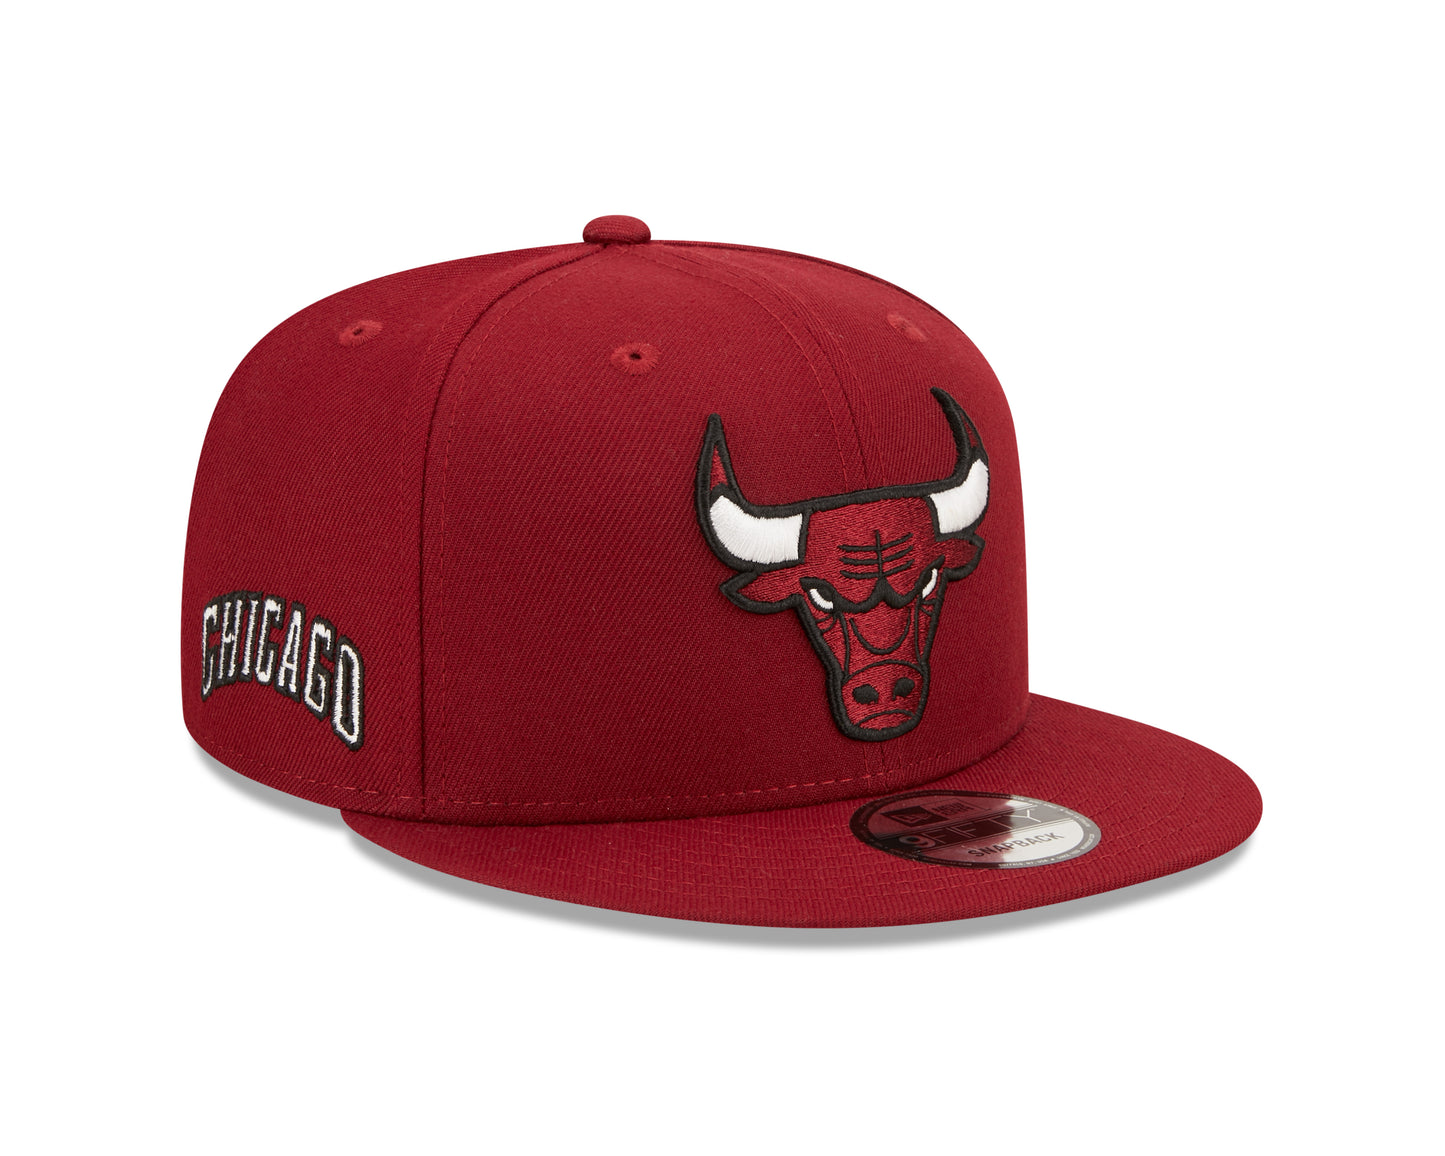 Chicago Bulls New Era Alternate City Edition 9FIFTY Snap Back Hat- Red